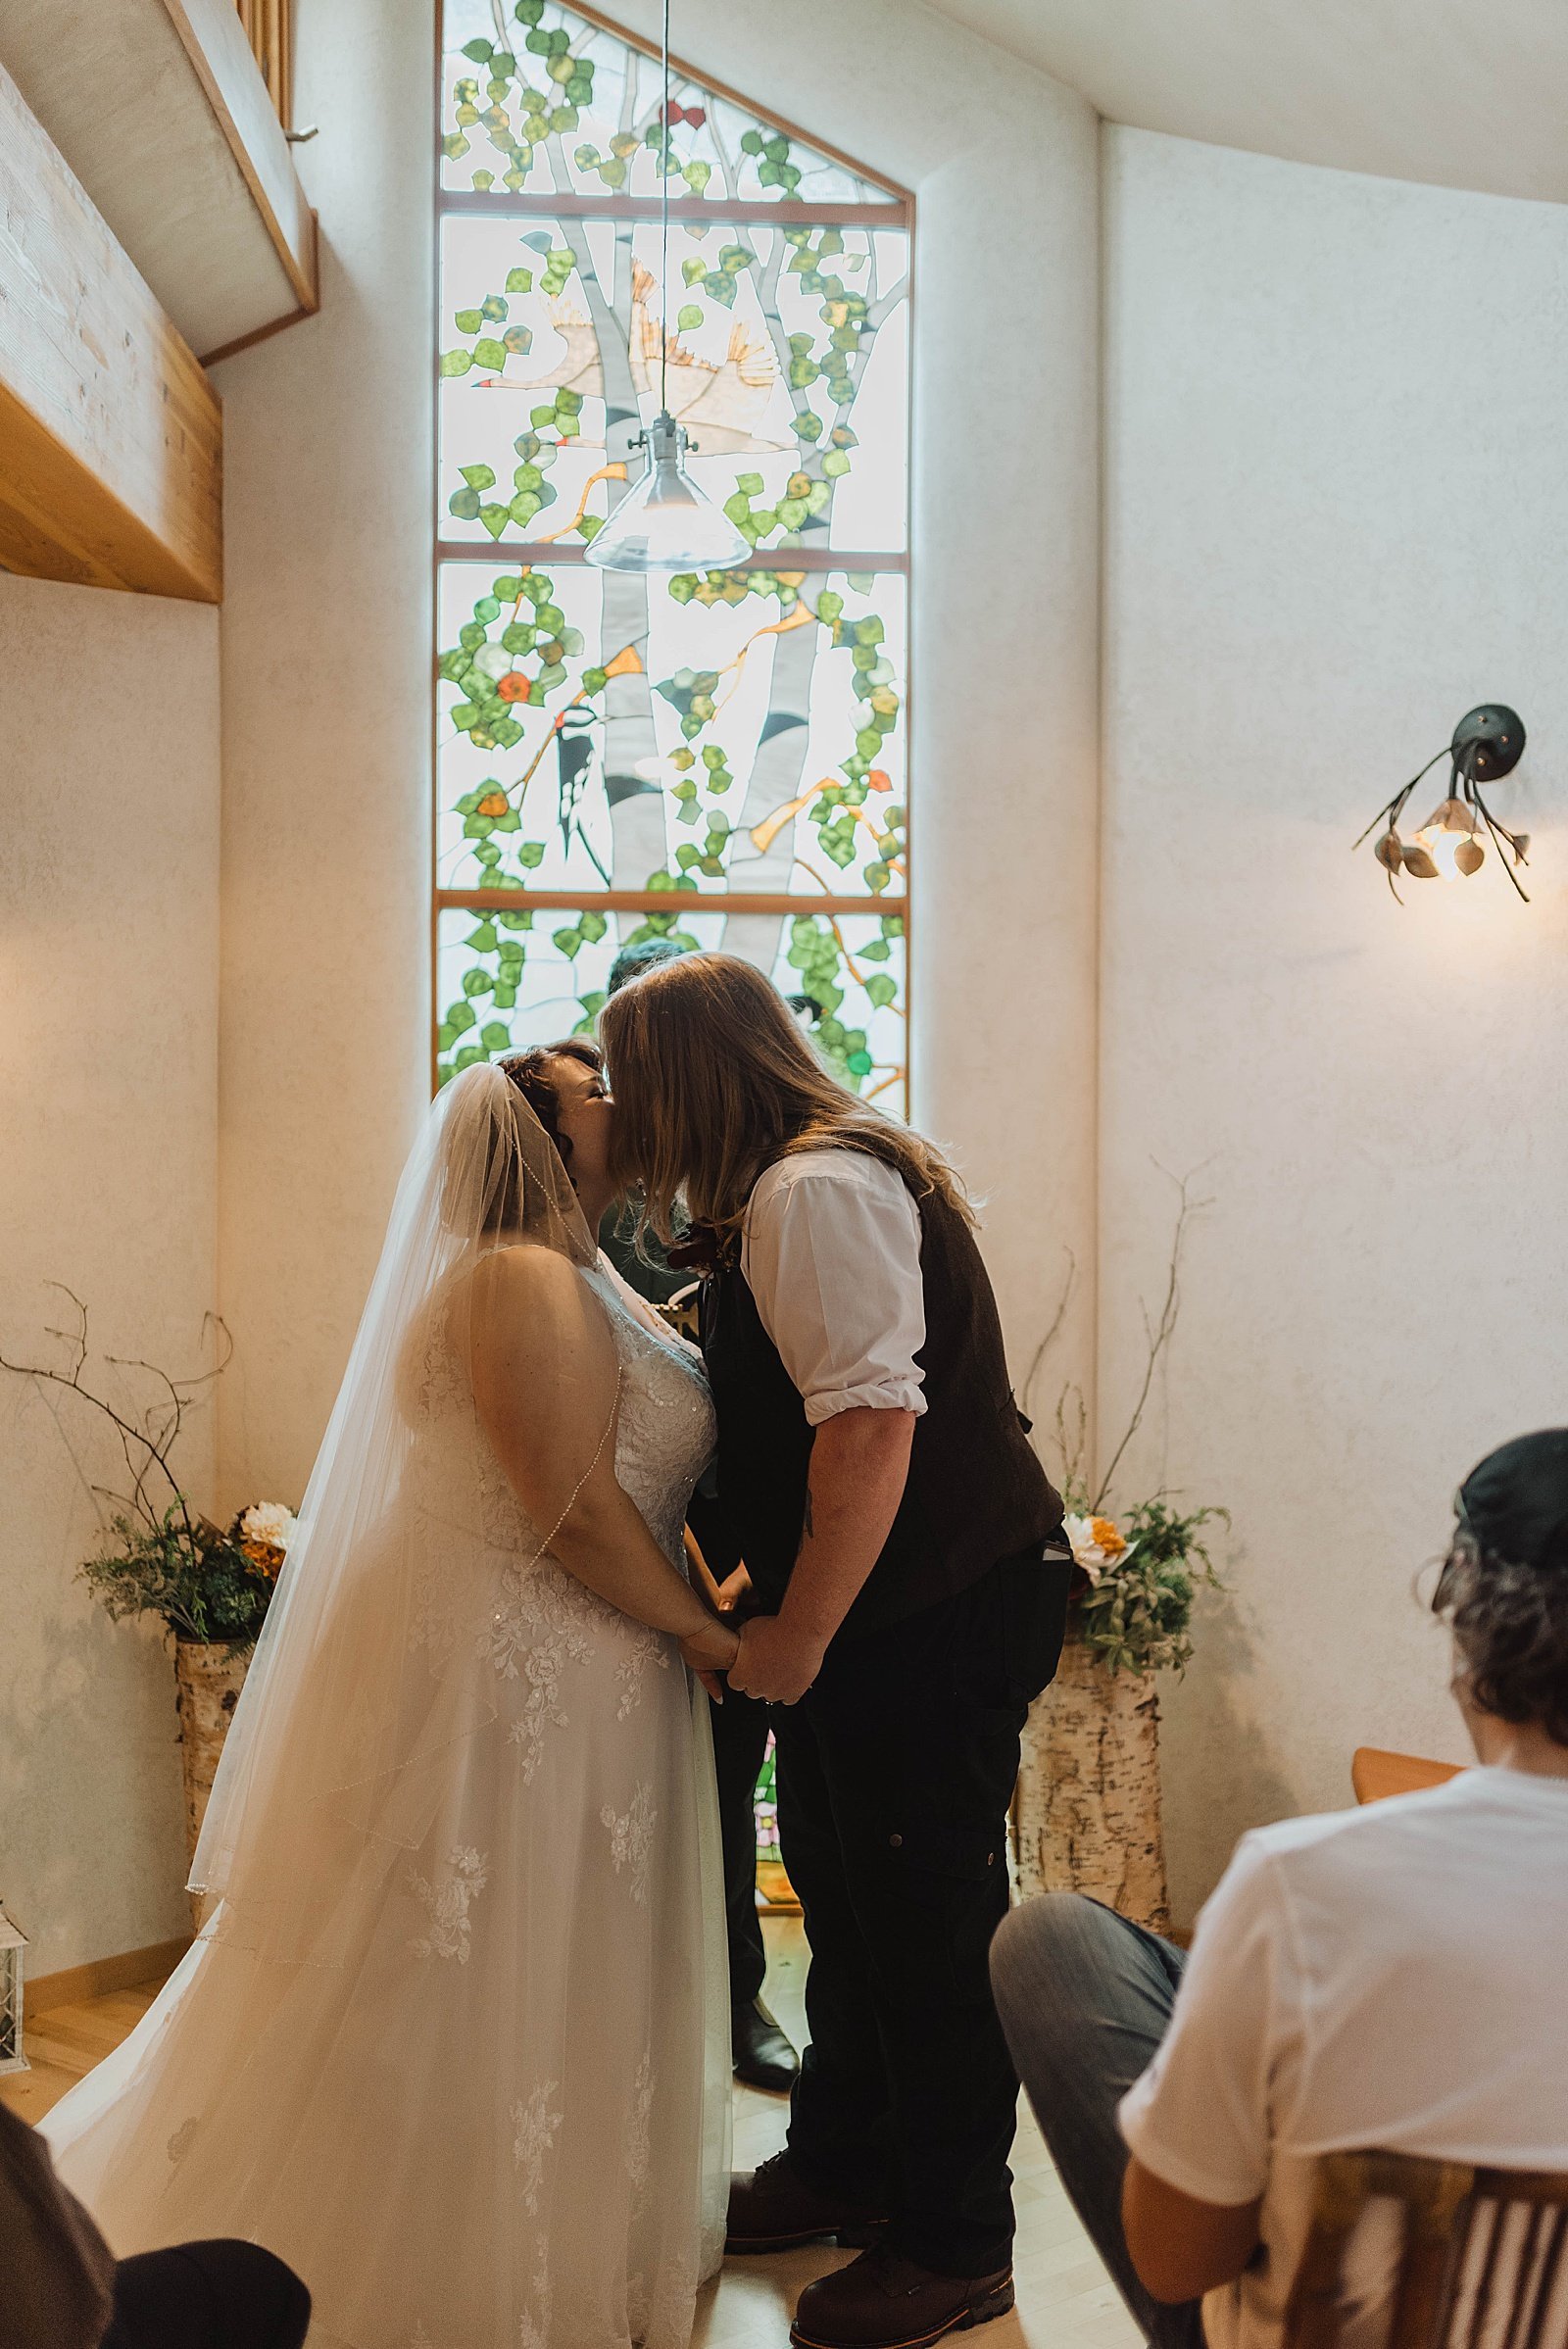  Newlyweds share a first kiss at the alter at their tiny wedding 